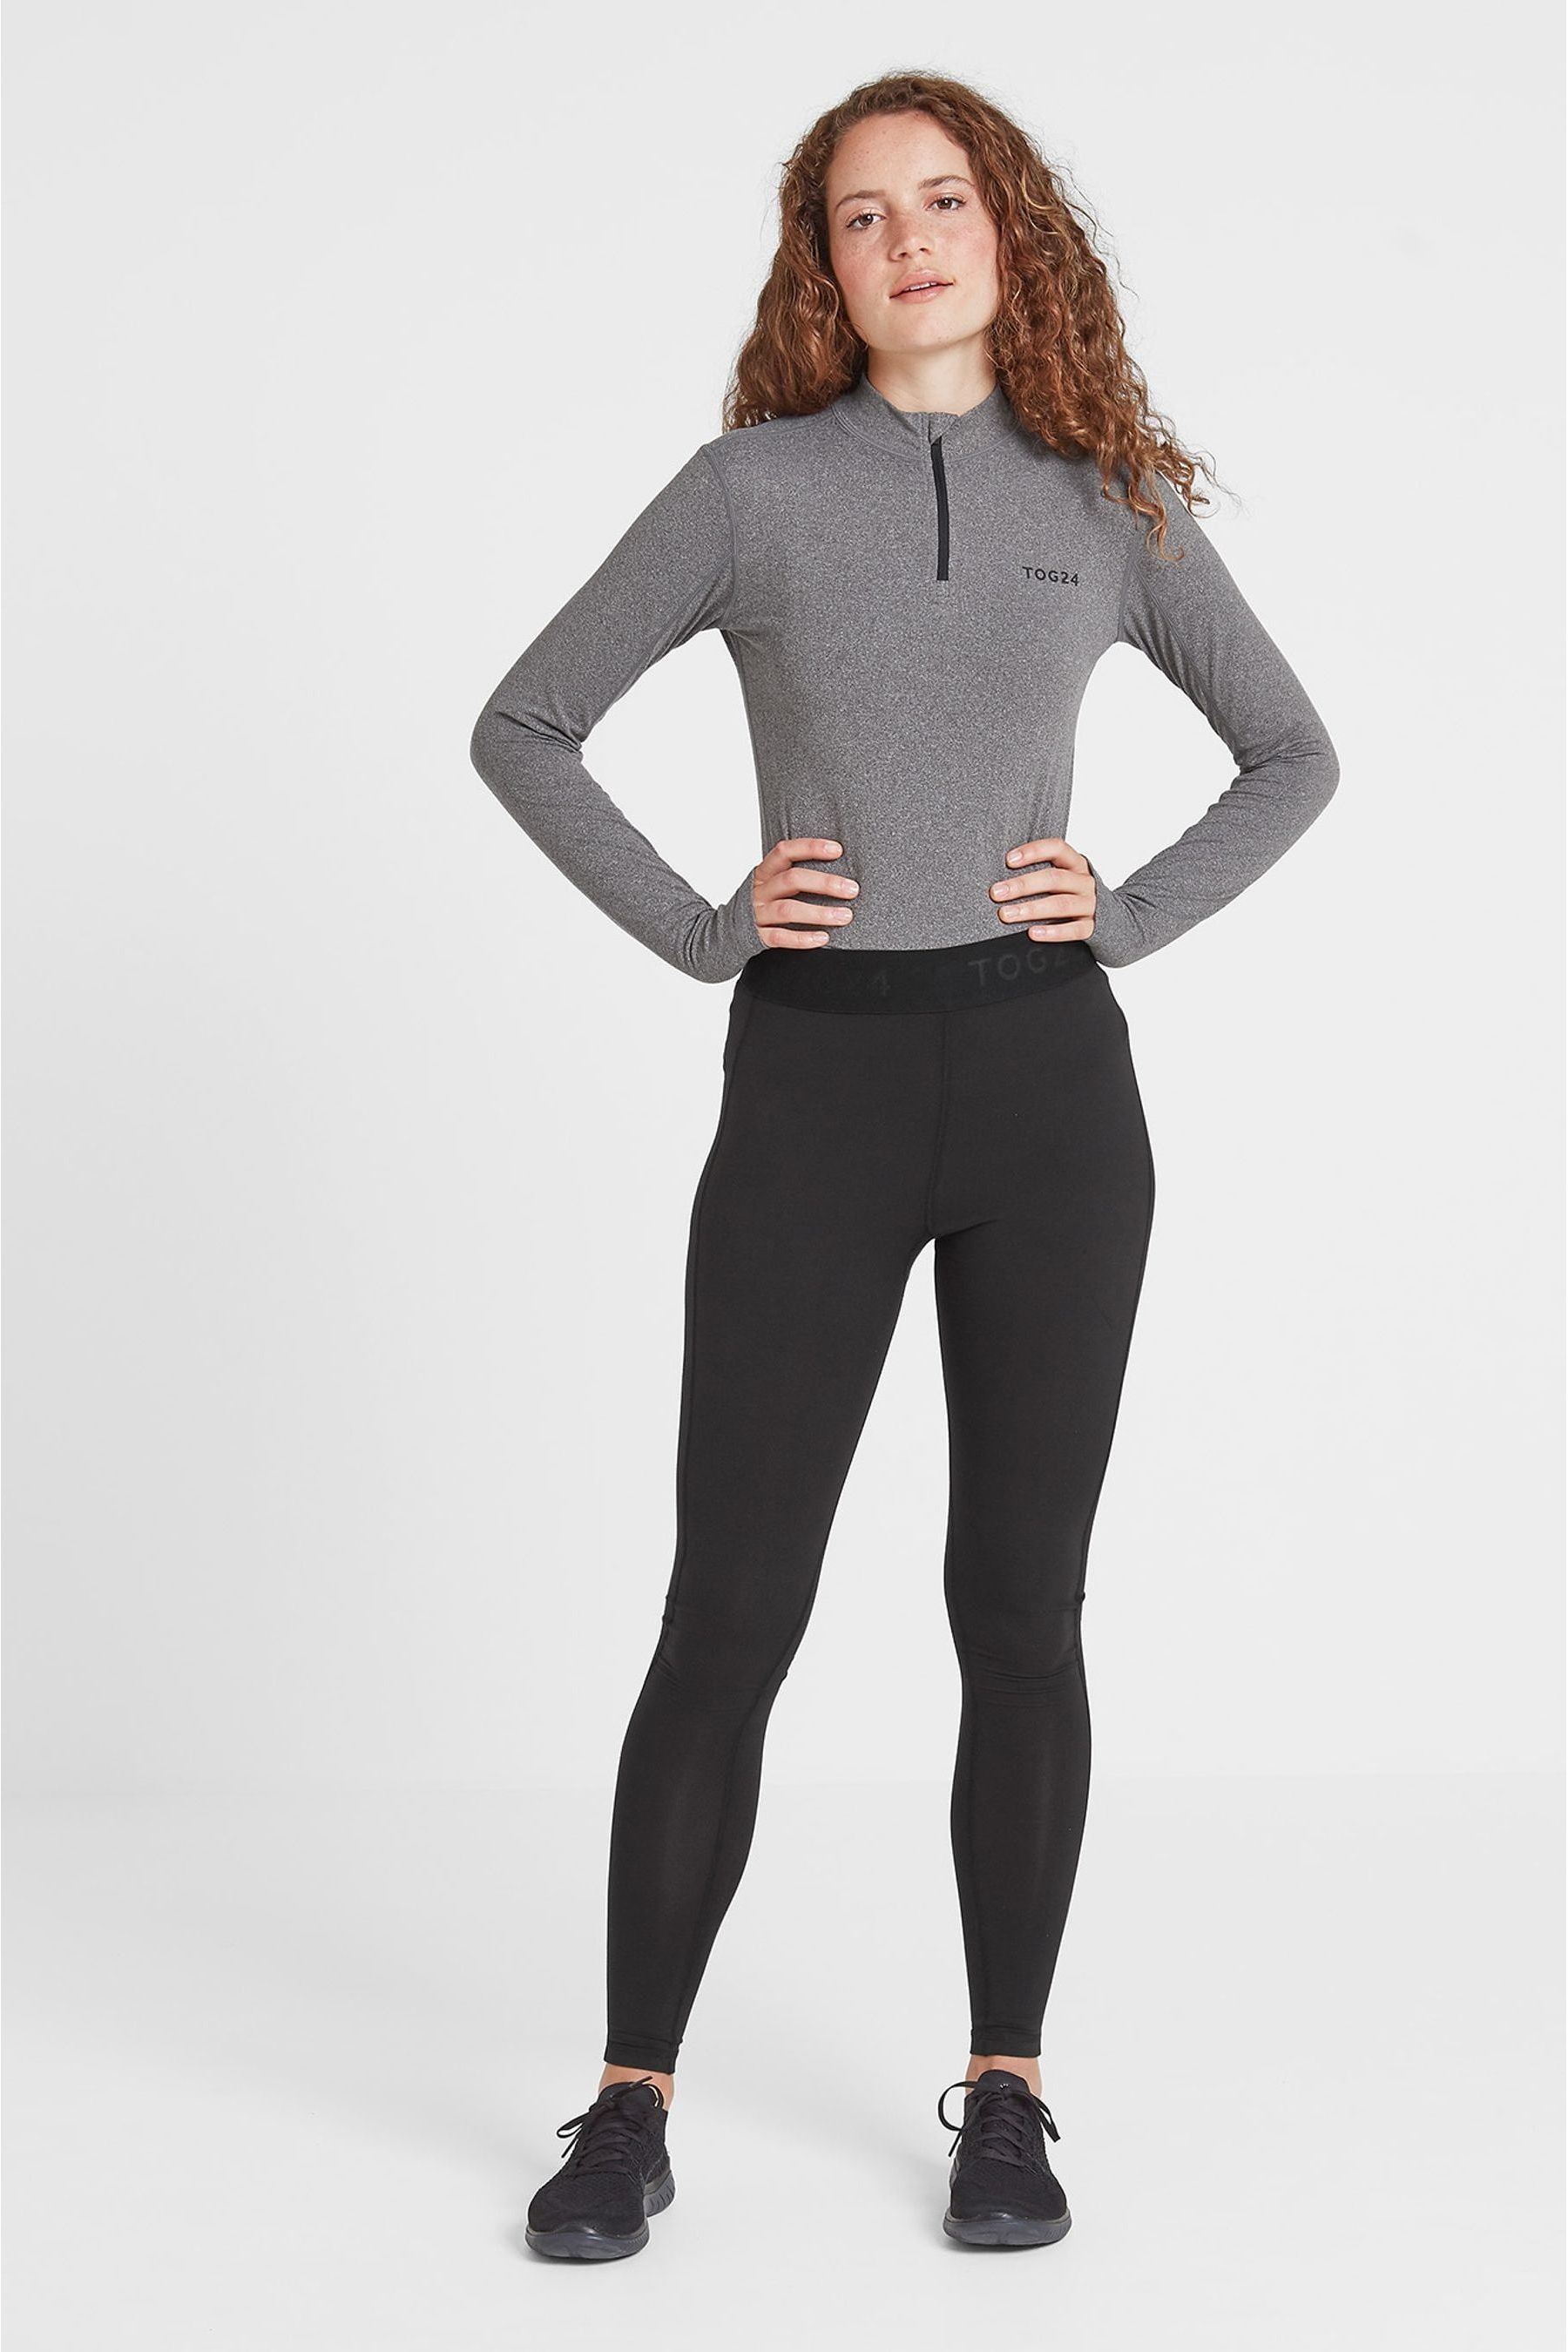 Girls Thermal Leggings Uk  International Society of Precision Agriculture